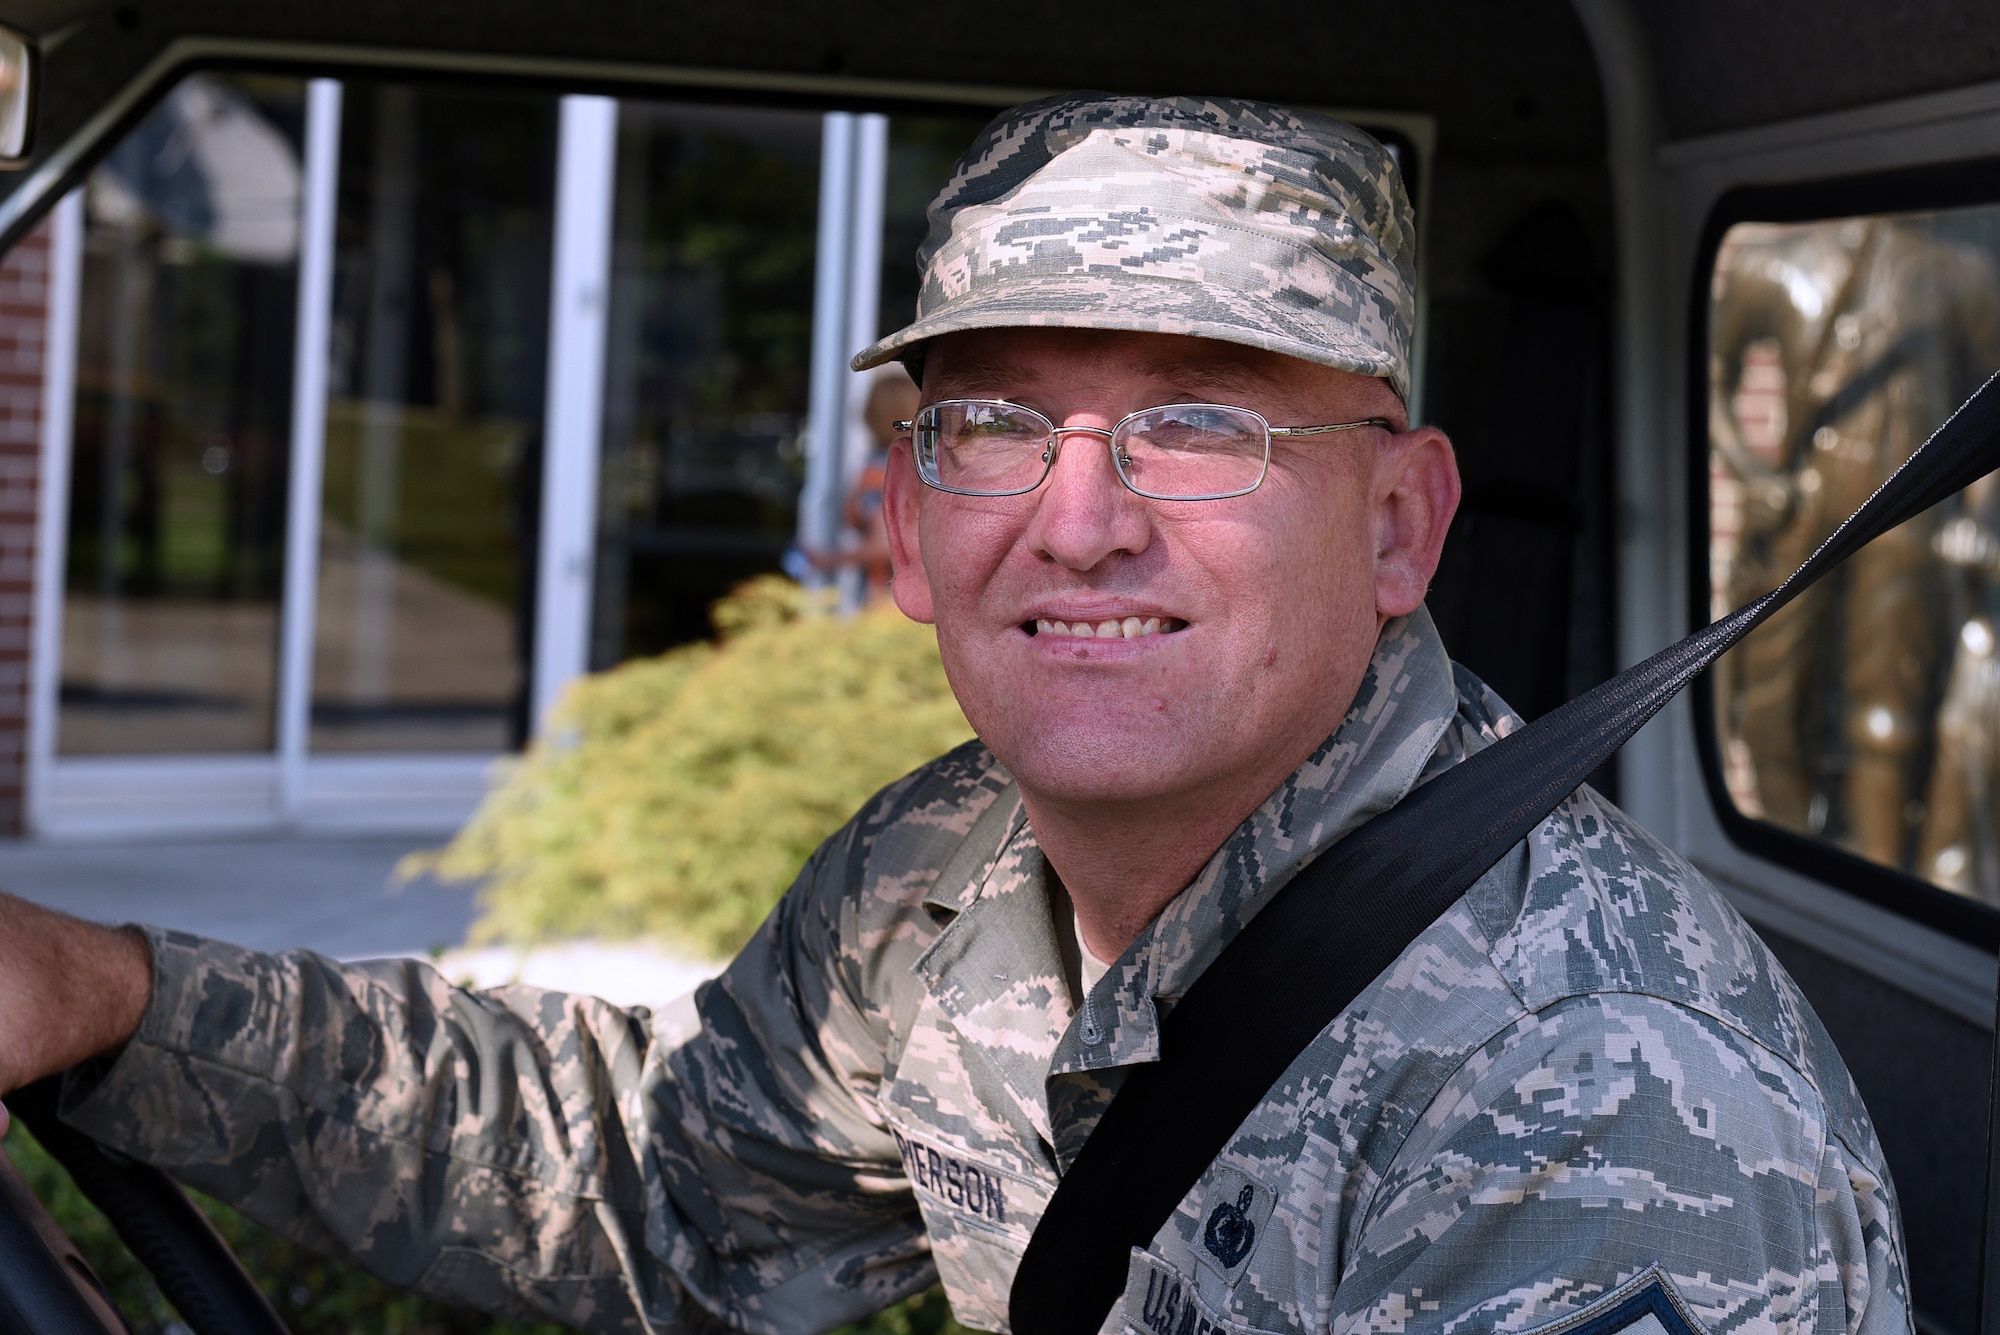 MCGHEE TYSON AIR NATIONAL GUARD BASE, Tenn. - Master Sgt. Don Pierson stops on just outside the Patriot Hall building here May 10, 2016, while managing his morning duties. Pierson is the Logistics manager as well as a former enlisted professional military education instructor for the I.G. Brown Training and Education Center. He is being reassigned to Texas after more than 10 years' service on campus. (U.S. Air National Guard photo by Master Sgt. Mike R. Smith/Released)